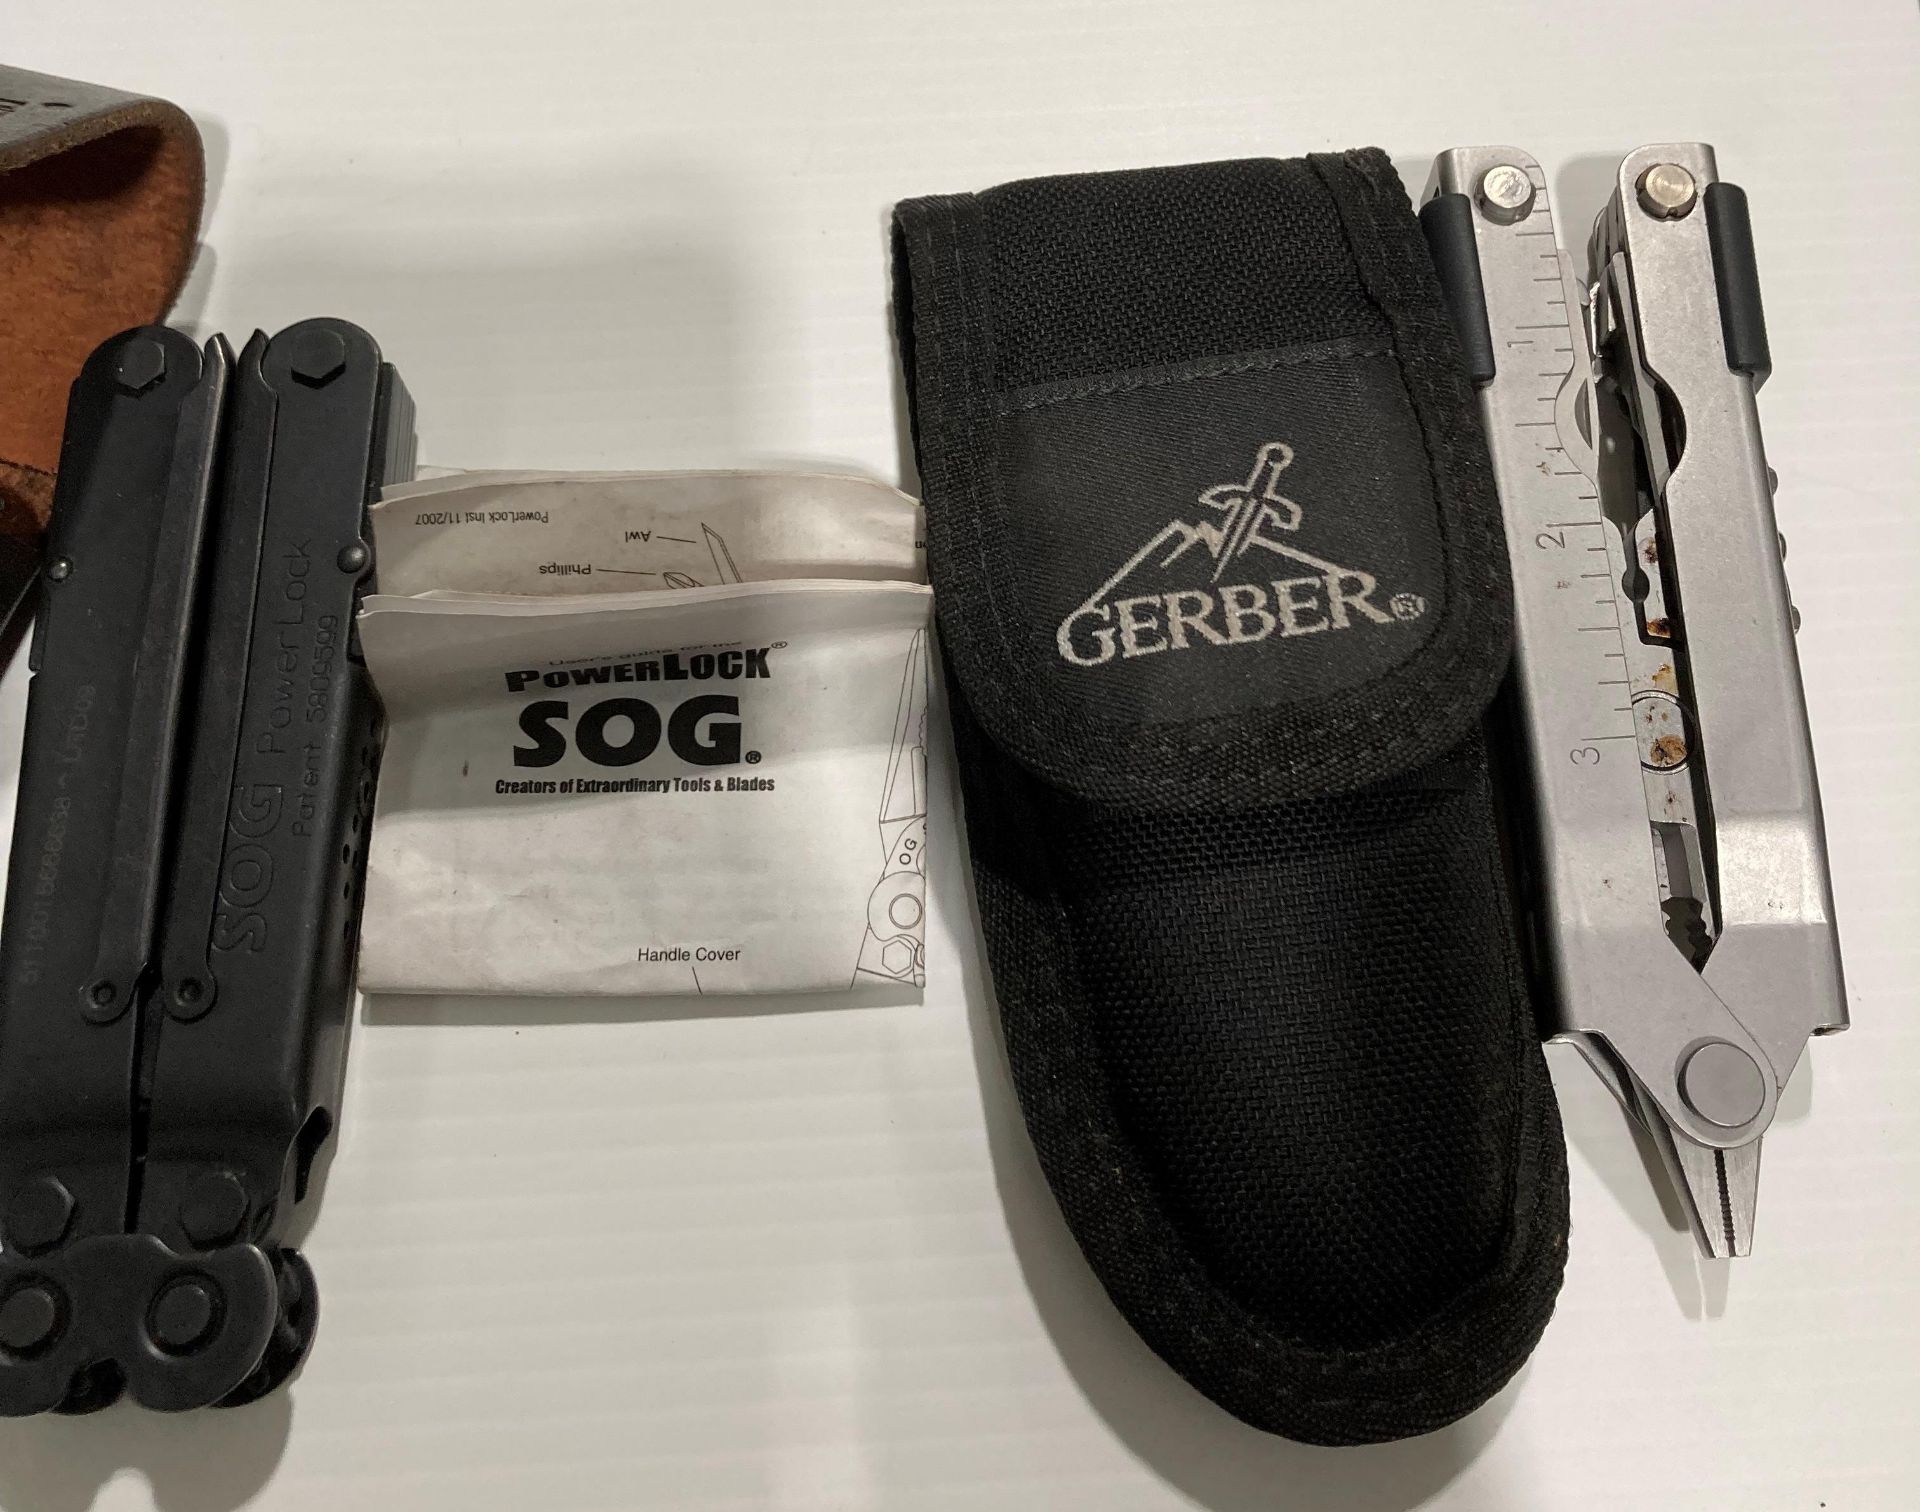 Two Gerber and one Powerlock Sog penknives complete with cases (3) (Saleroom location: S3 Counter) - Image 3 of 3